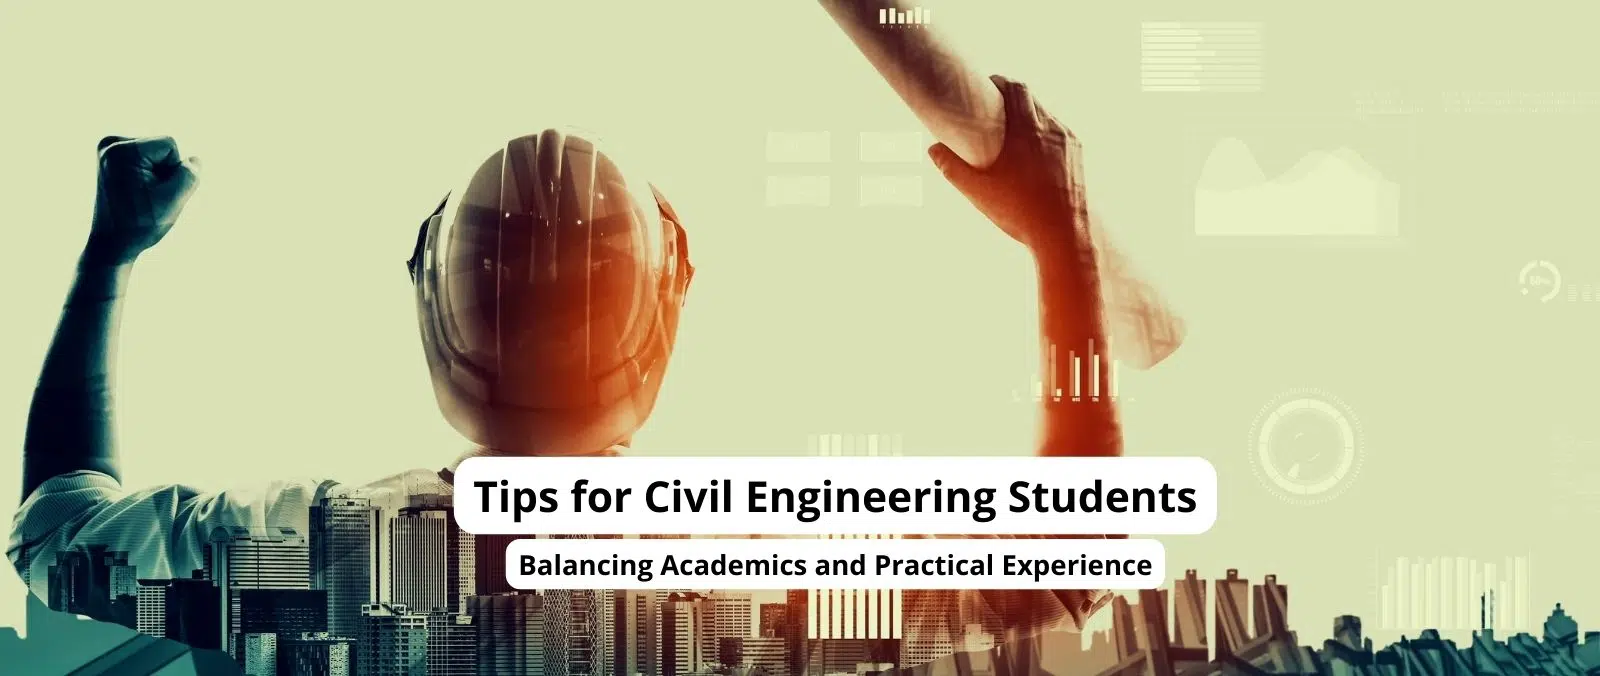 Tips for Civil Engineering Students